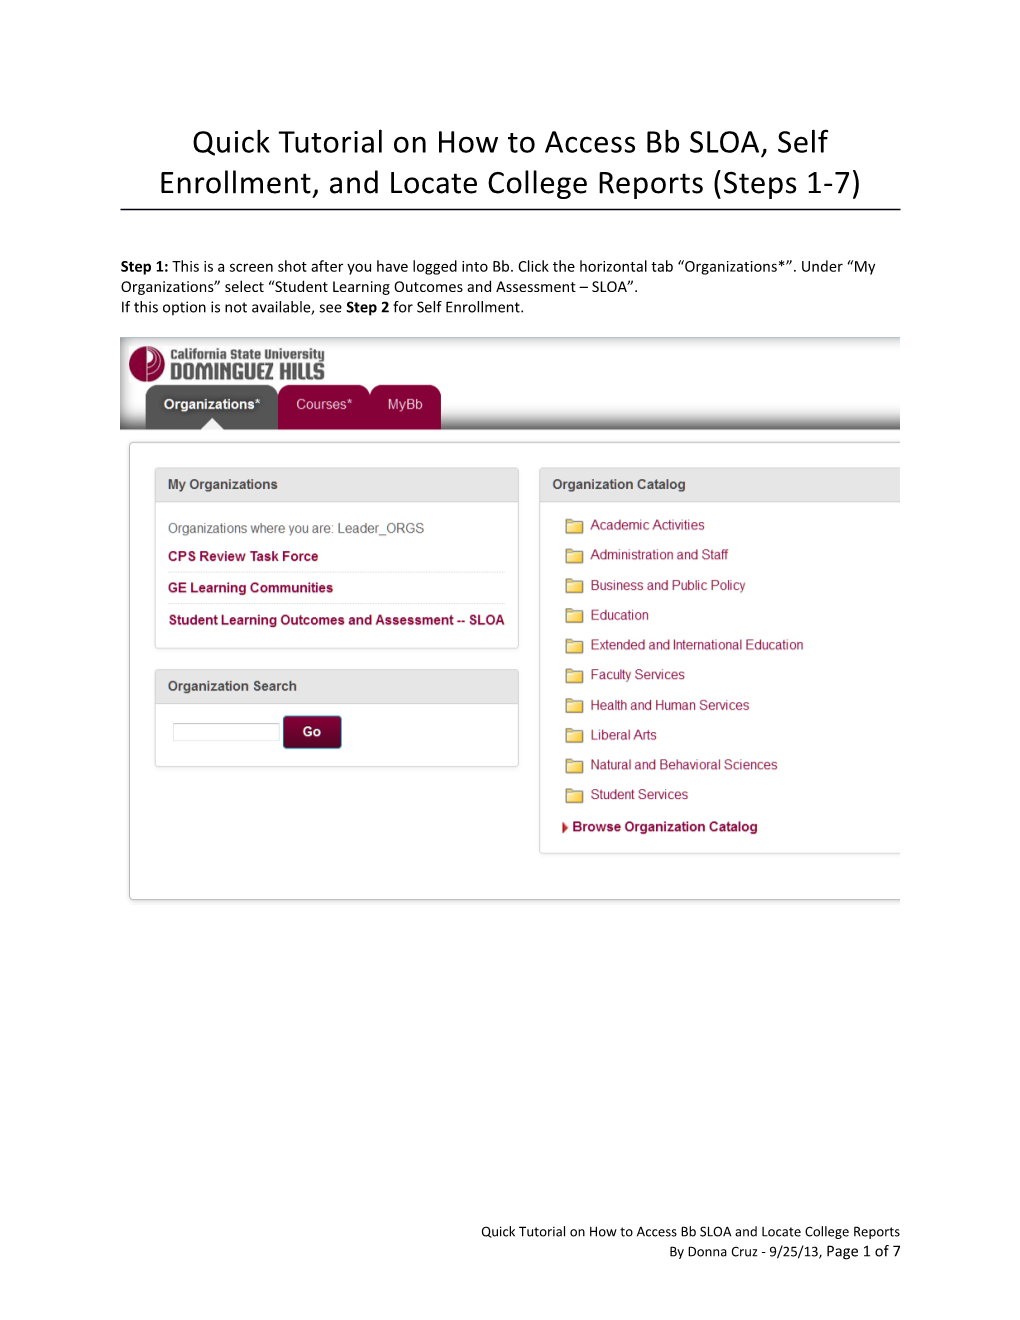 Quick Tutorial on How to Access Bb SLOA, Self Enrollment, and Locate College Reports (Steps 1-7)